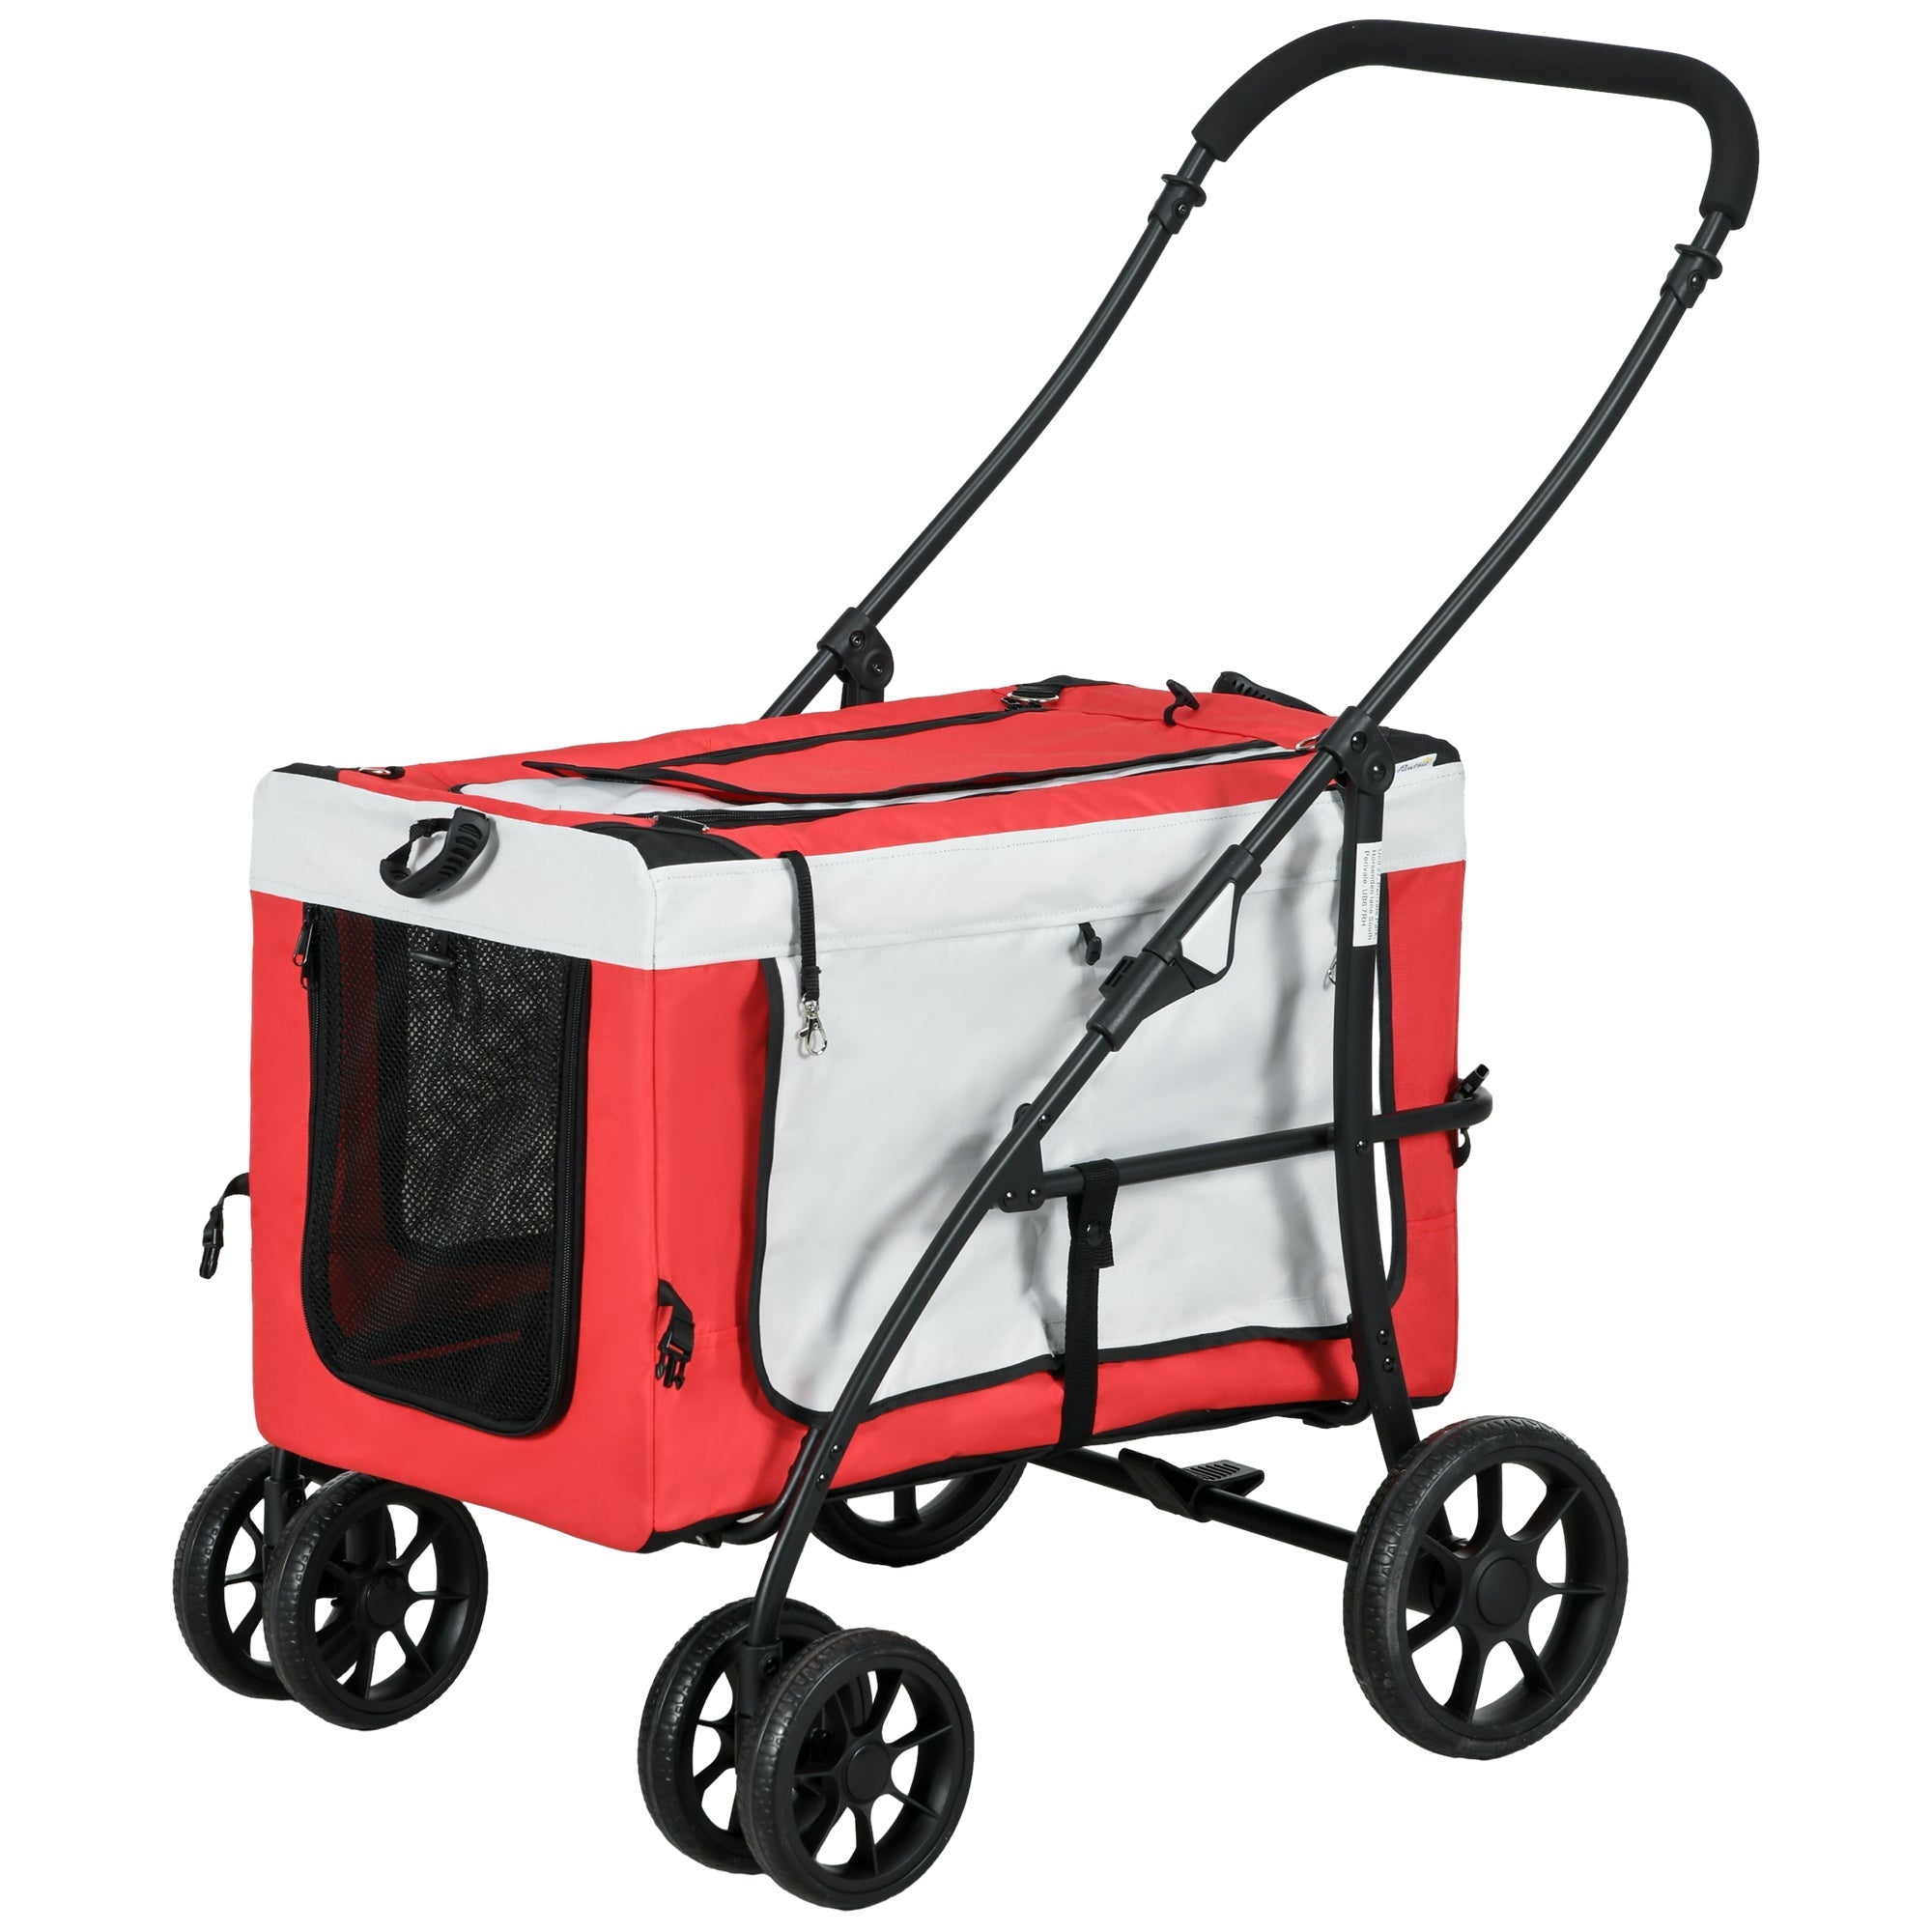 Foldable Dog Stroller, Pet Travel Crate, with Detachable Carrier, Soft Padding, for Mini, Small Dogs - Red-0